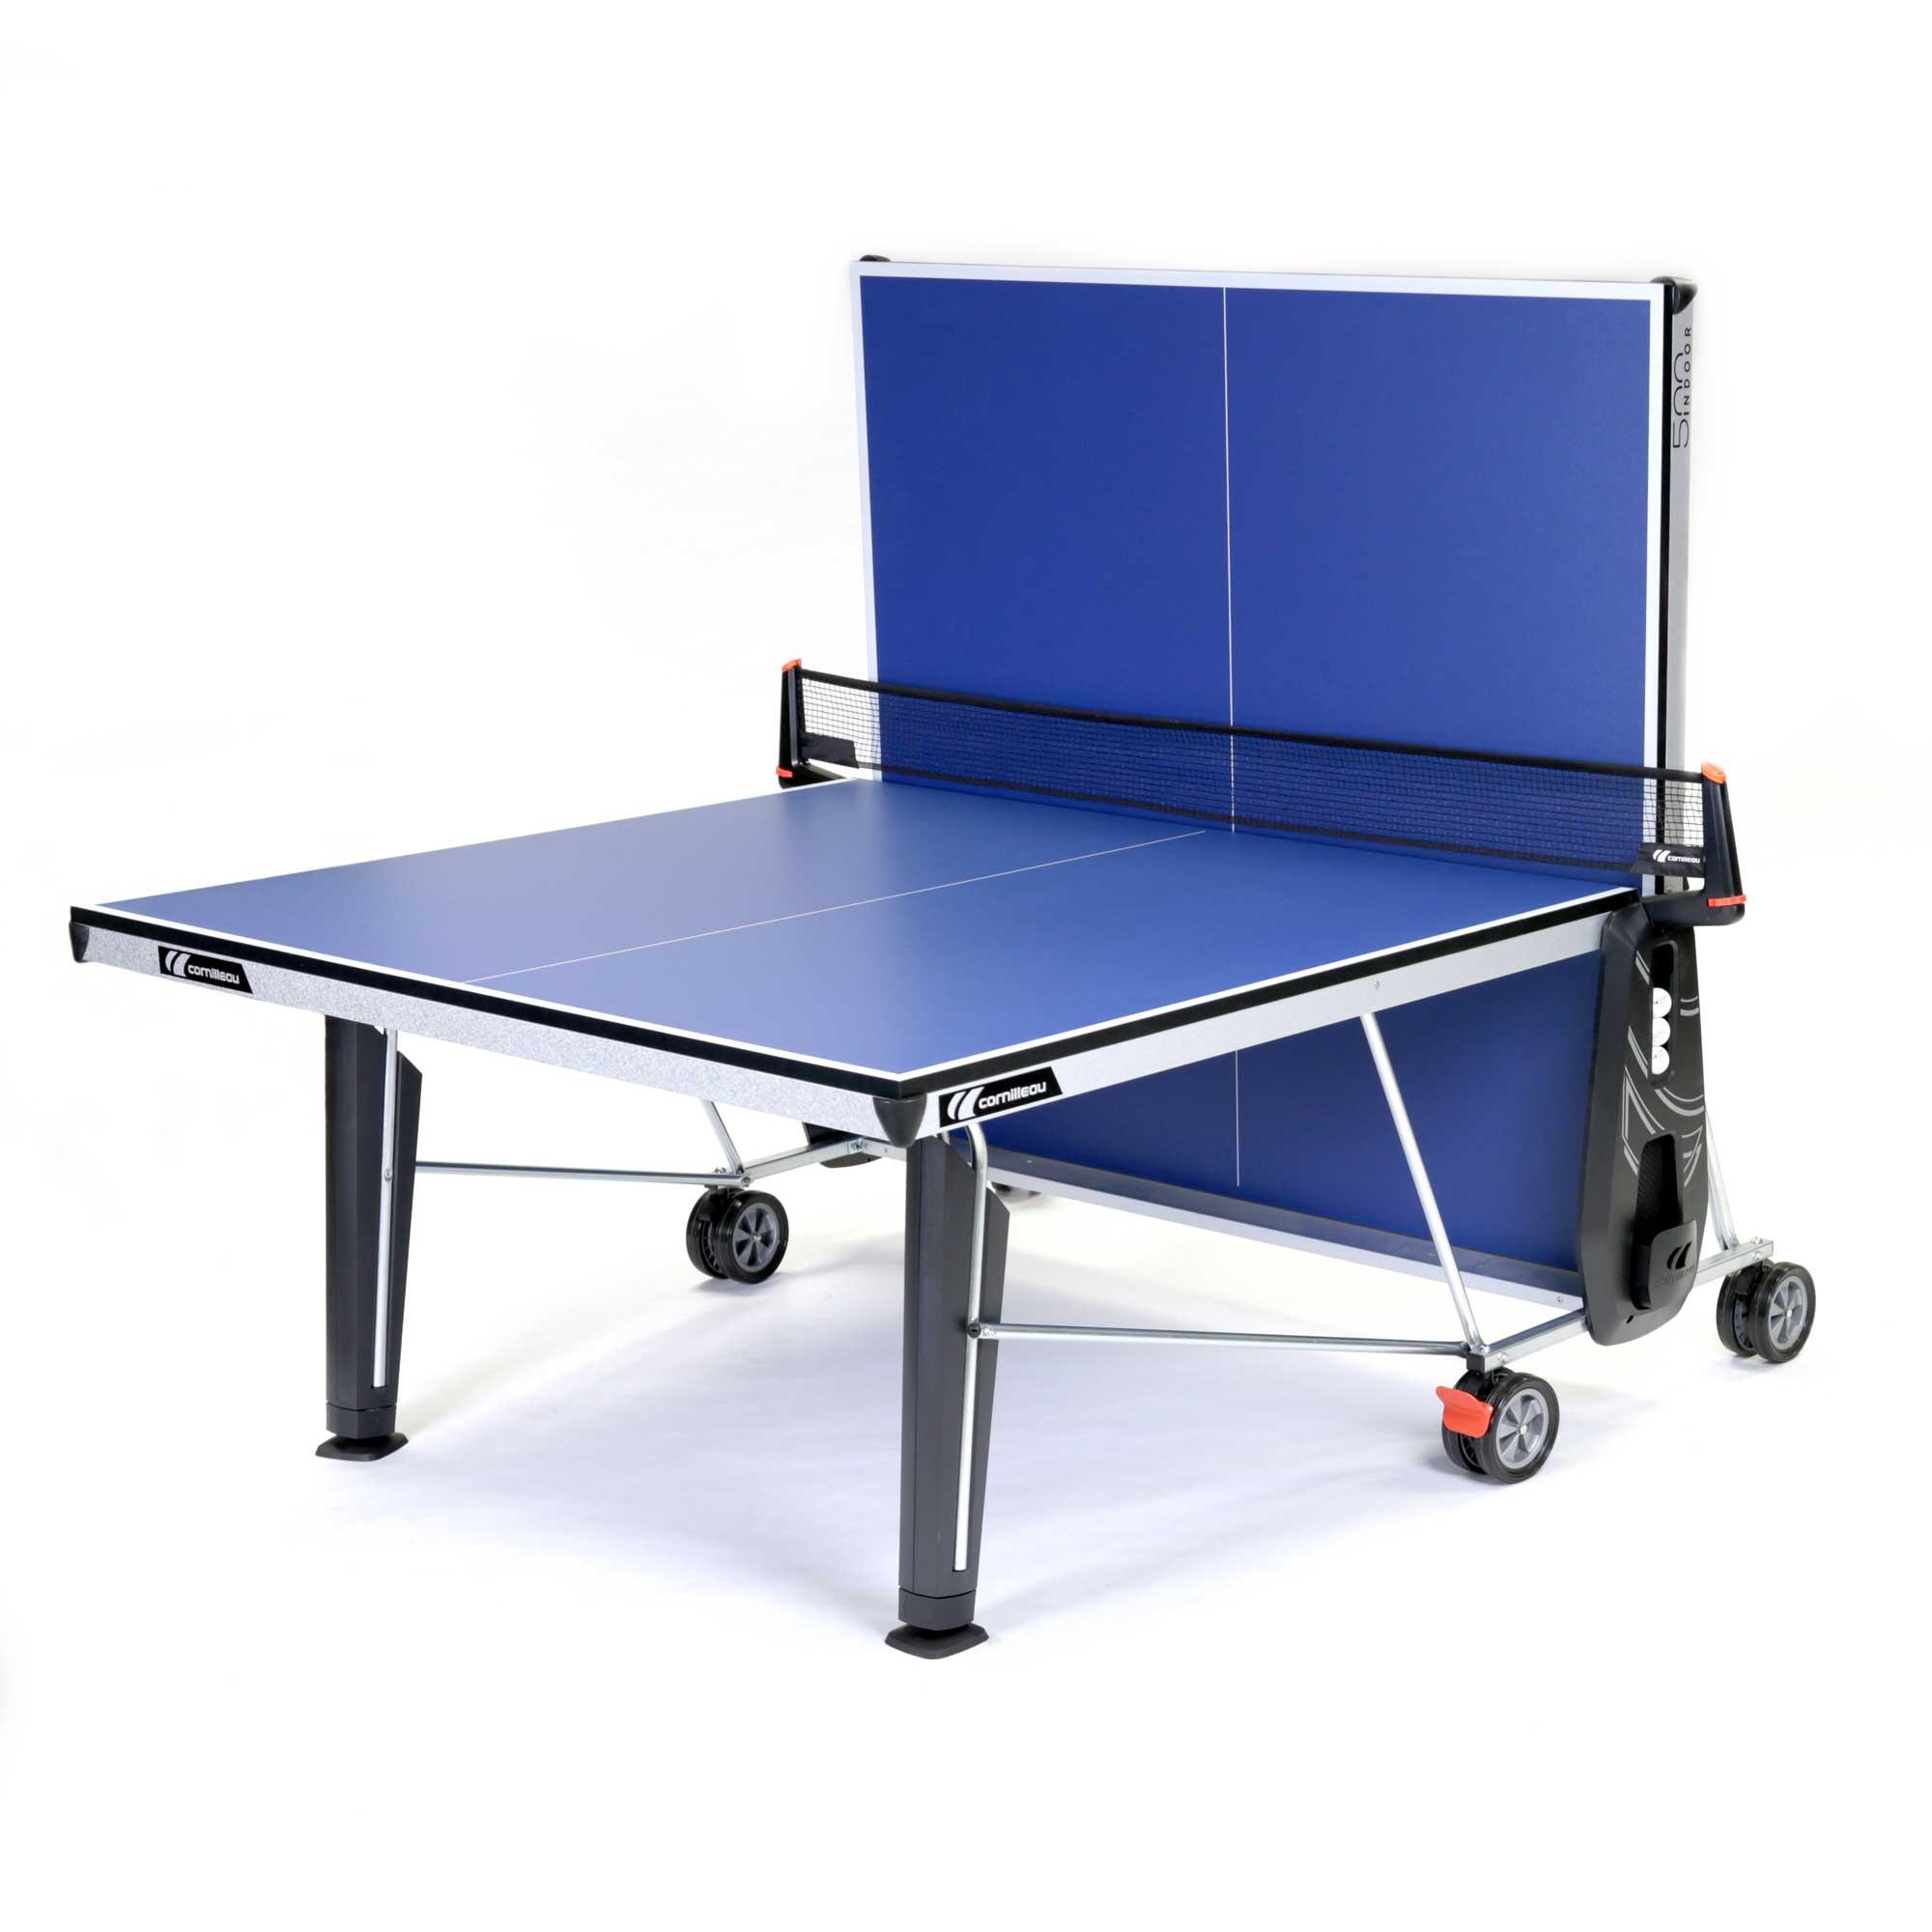 NEW 500 Indoor Table Tennis Table - Blue 2/8